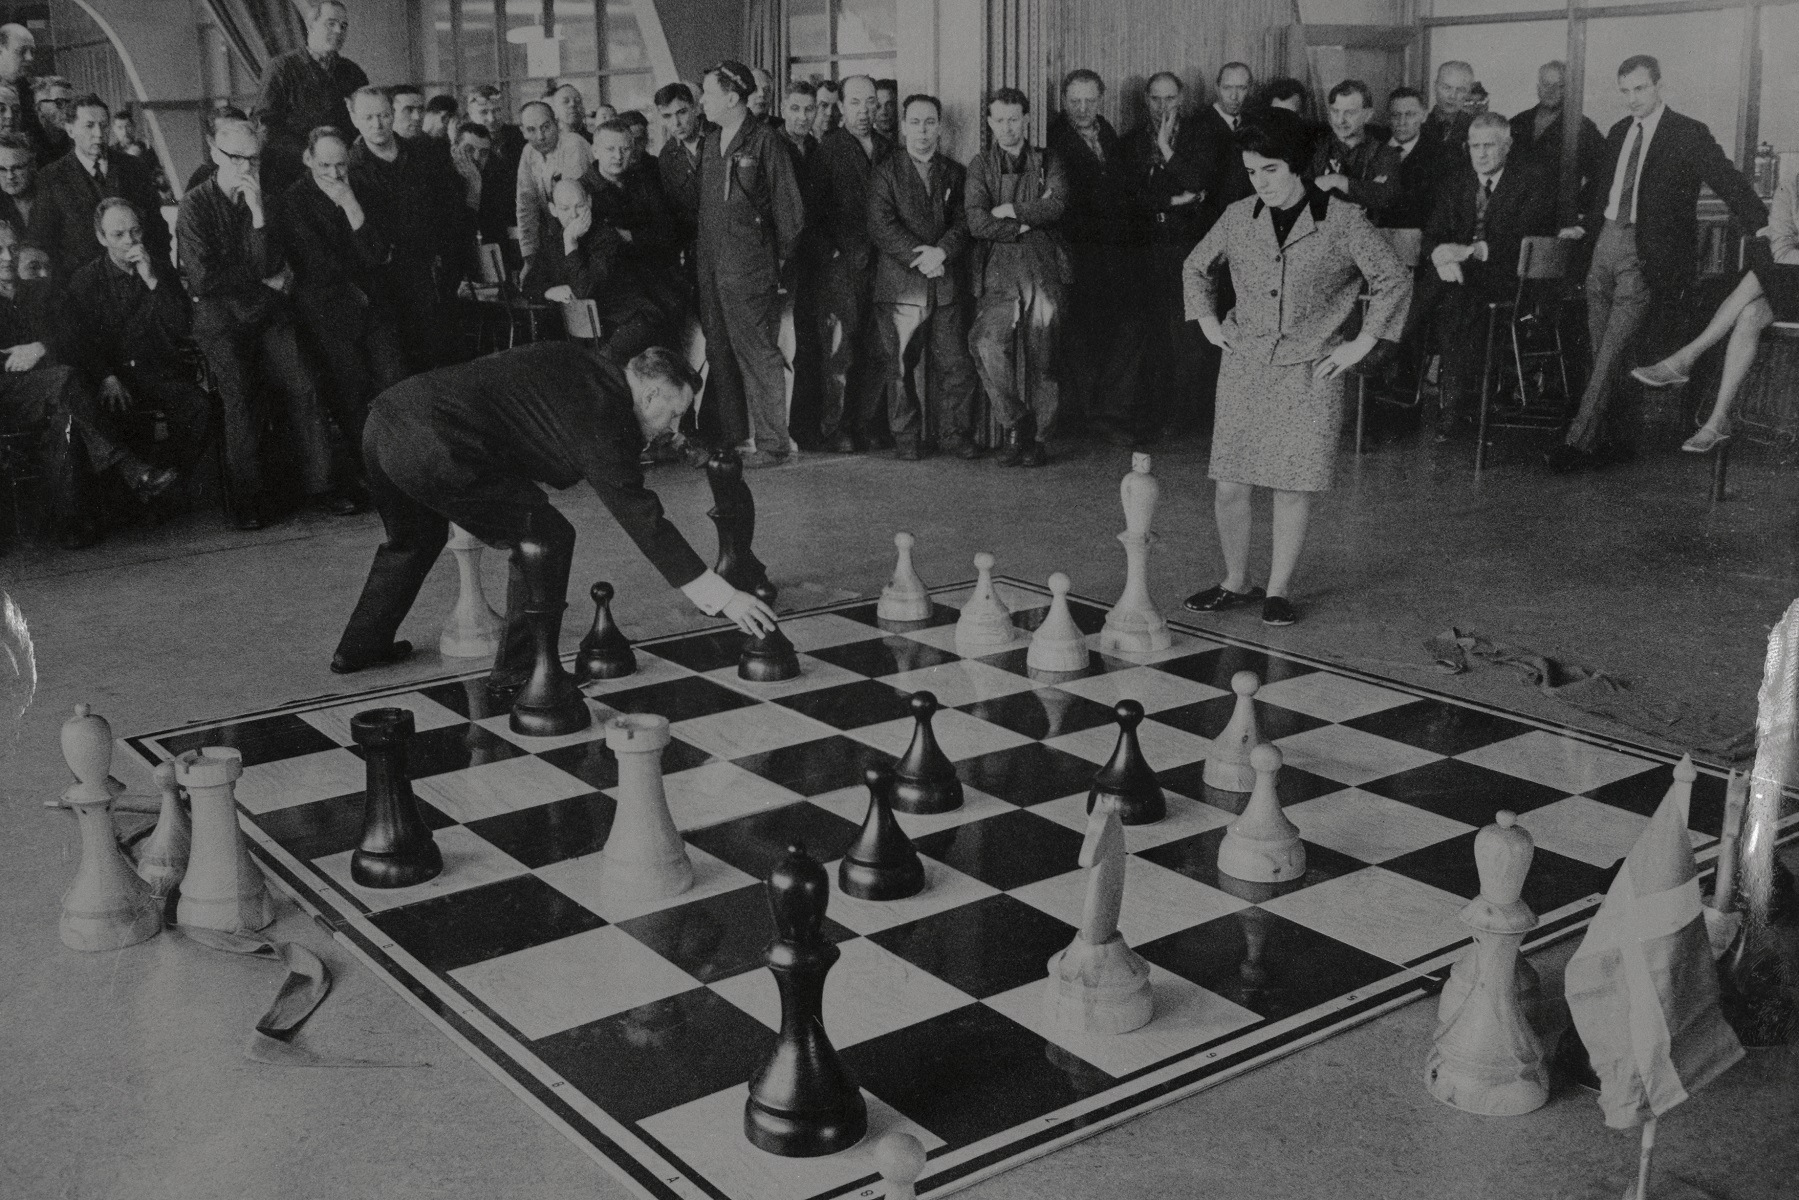  Nona Gaprindashvili (right) plays a game of giant chess against Ake Wall in 1968